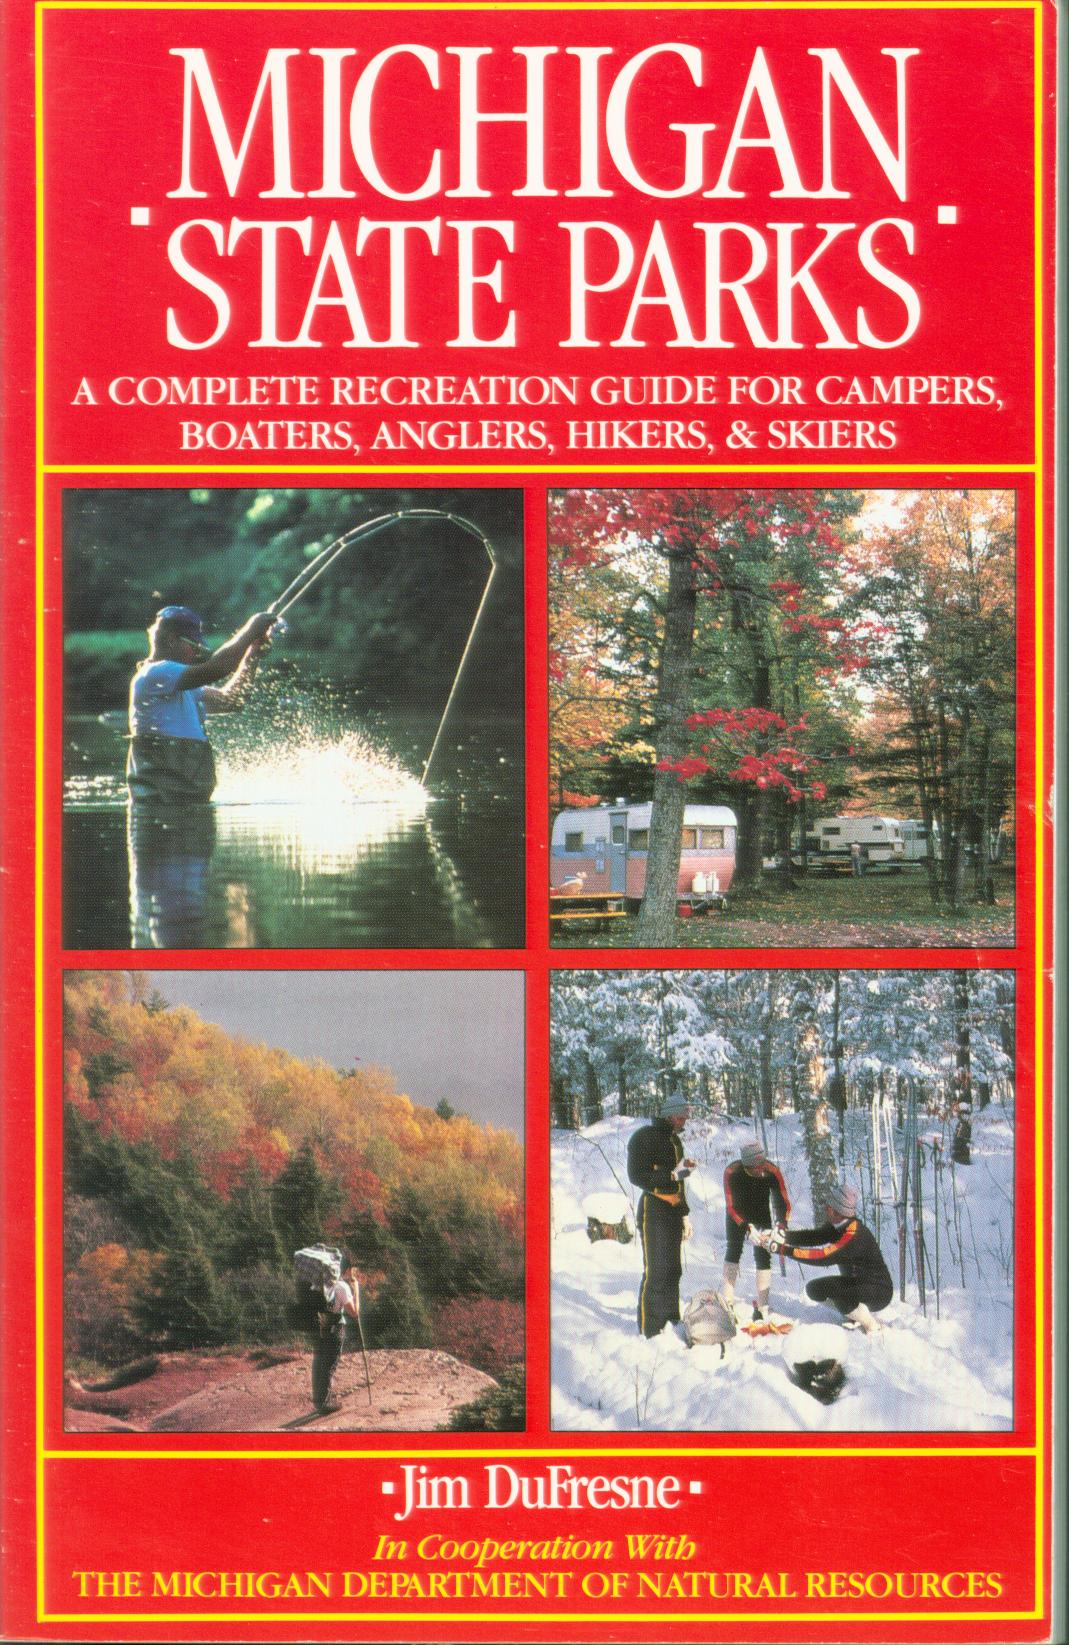 MICHIGAN STATE PARKS: a complete recreation guide for campers, boaters, anglers, hikers & skiers. 